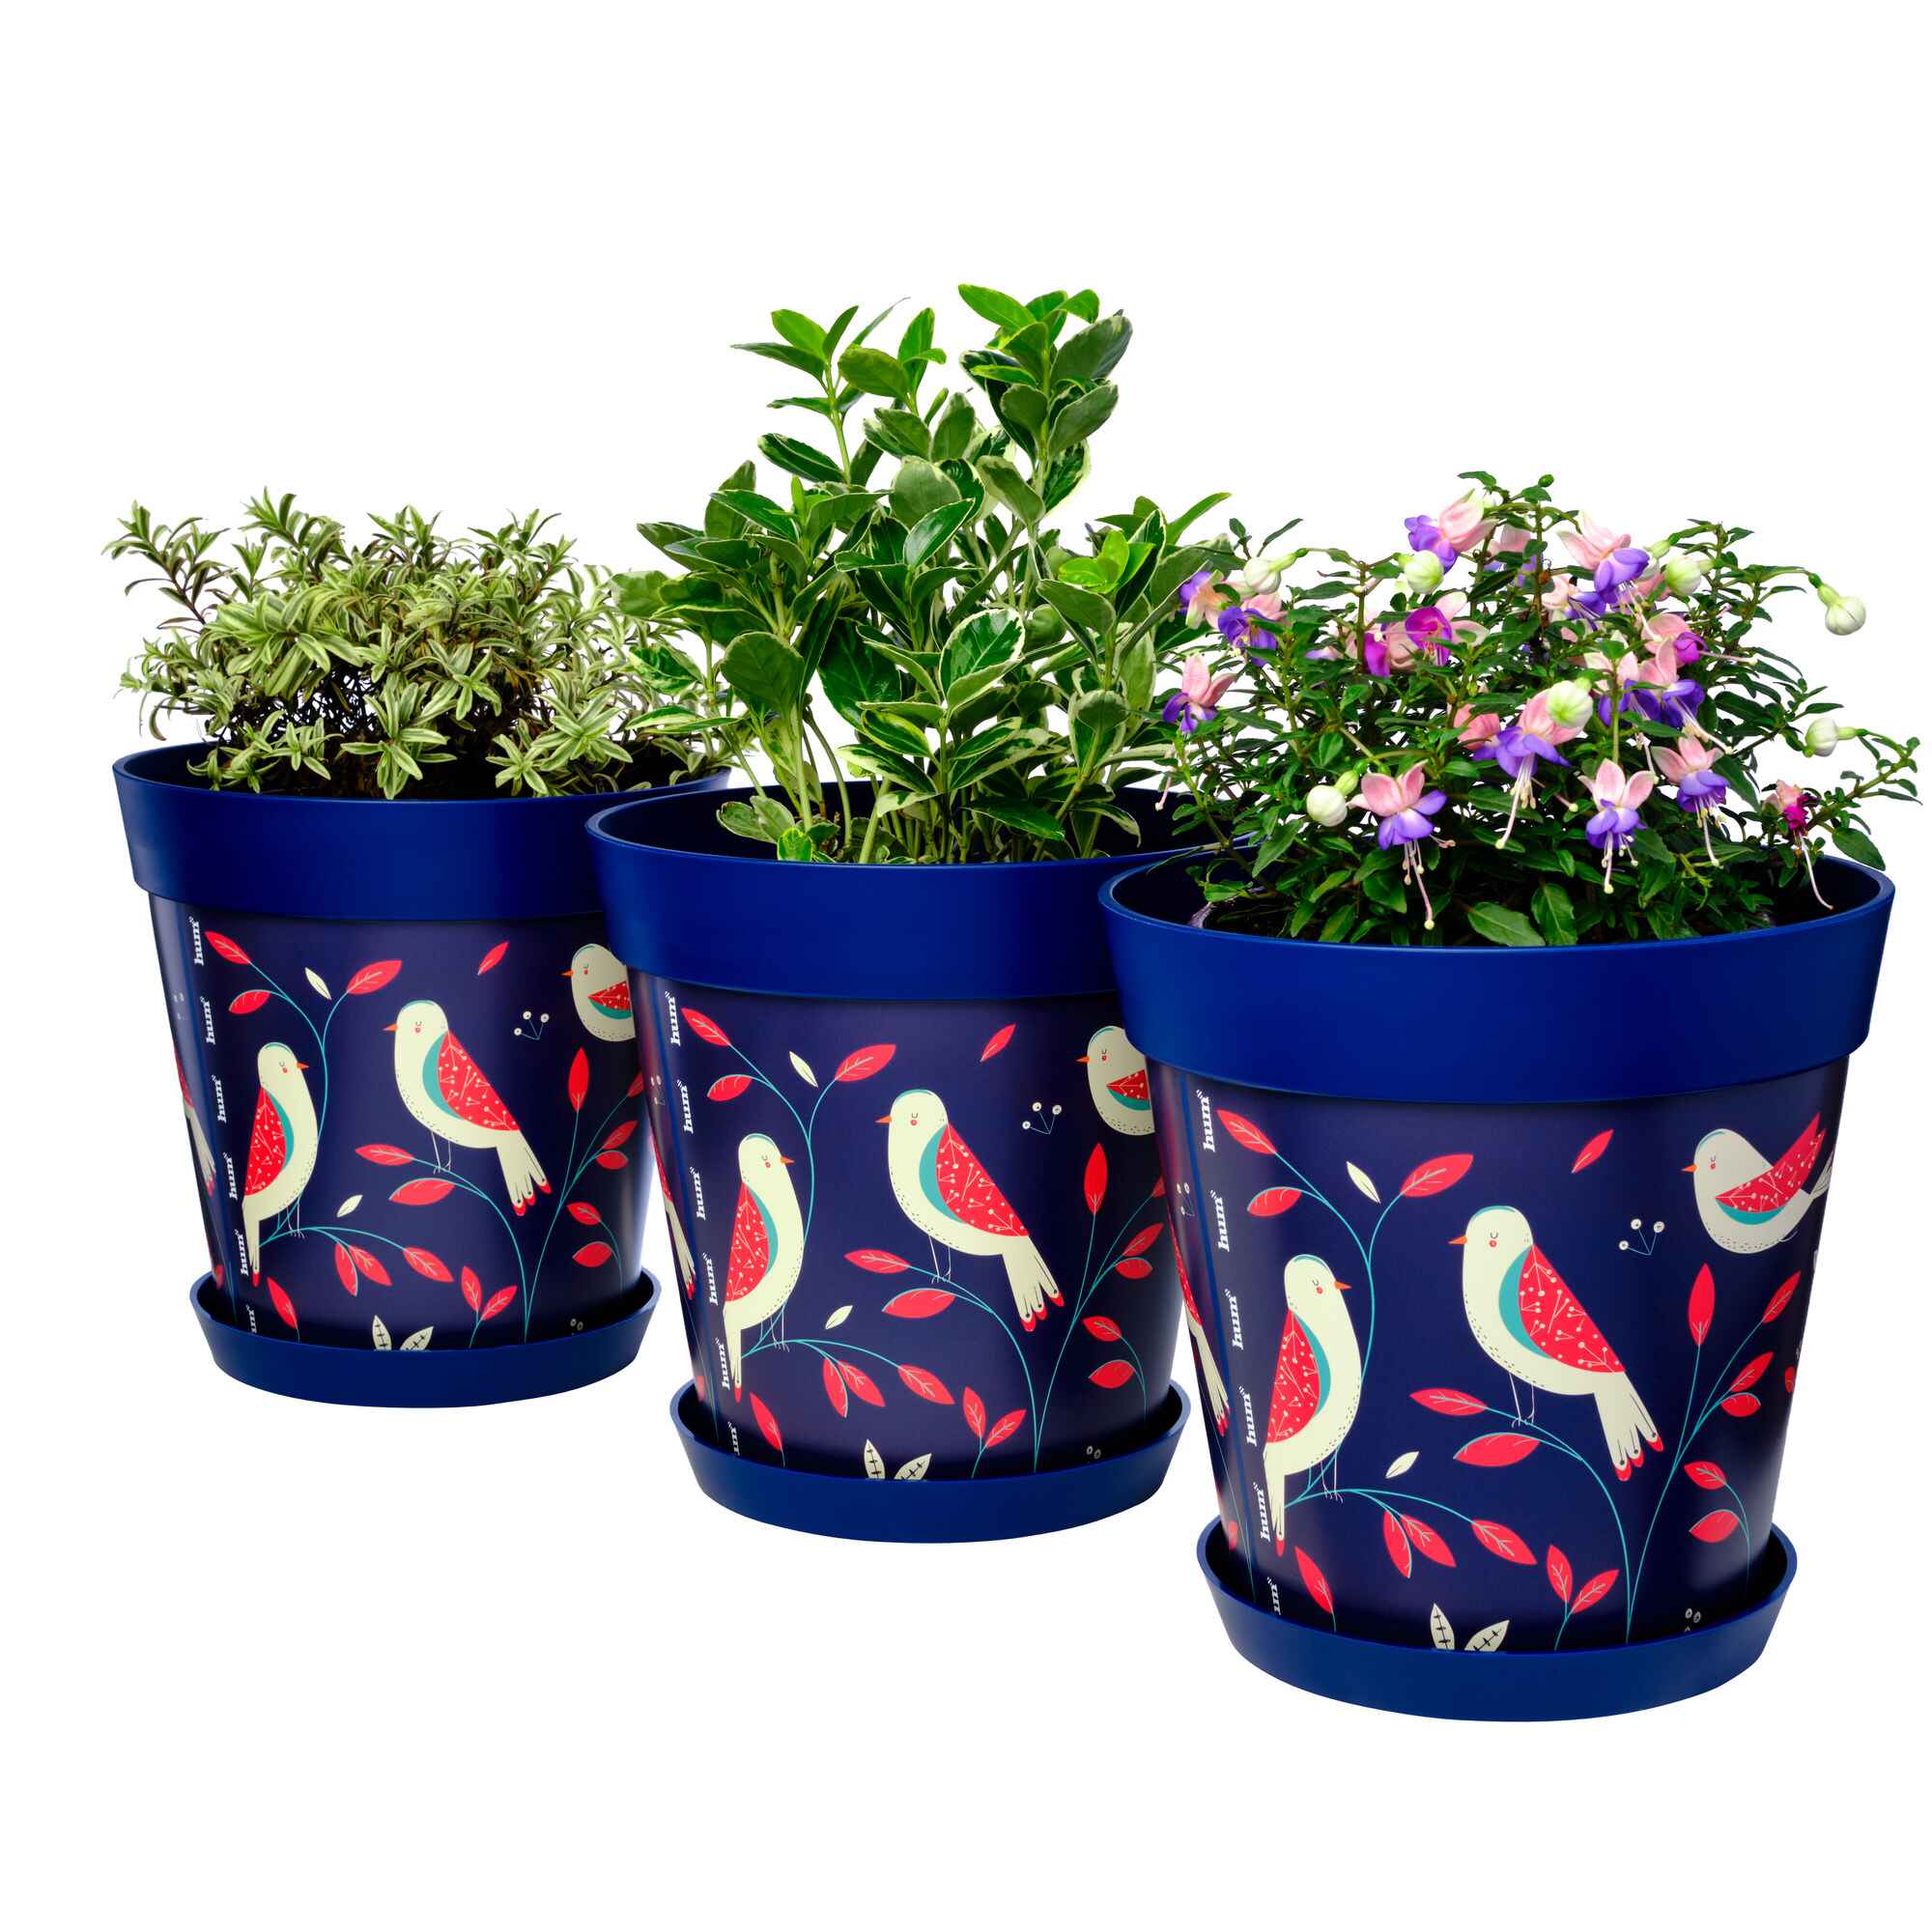 Picture of 3 Planted Large 25cm Blue Bird Plastic Indoor/Outdoor Flowerpot and Saucers